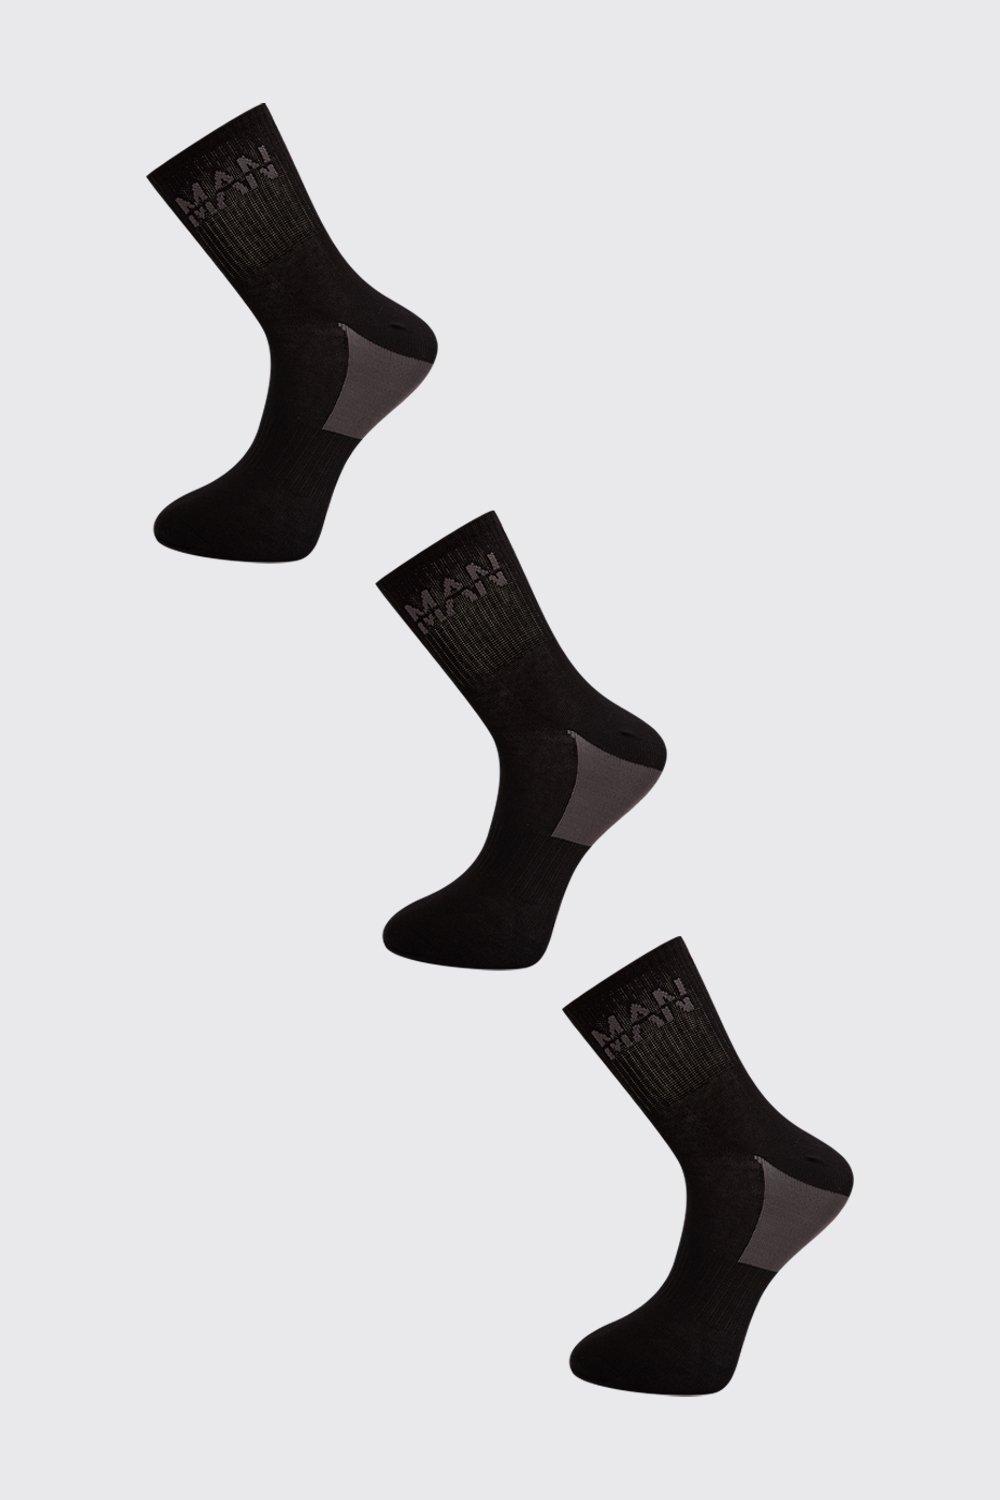 PACK 3 PARES CALCETINES HOMBRE NEGRO